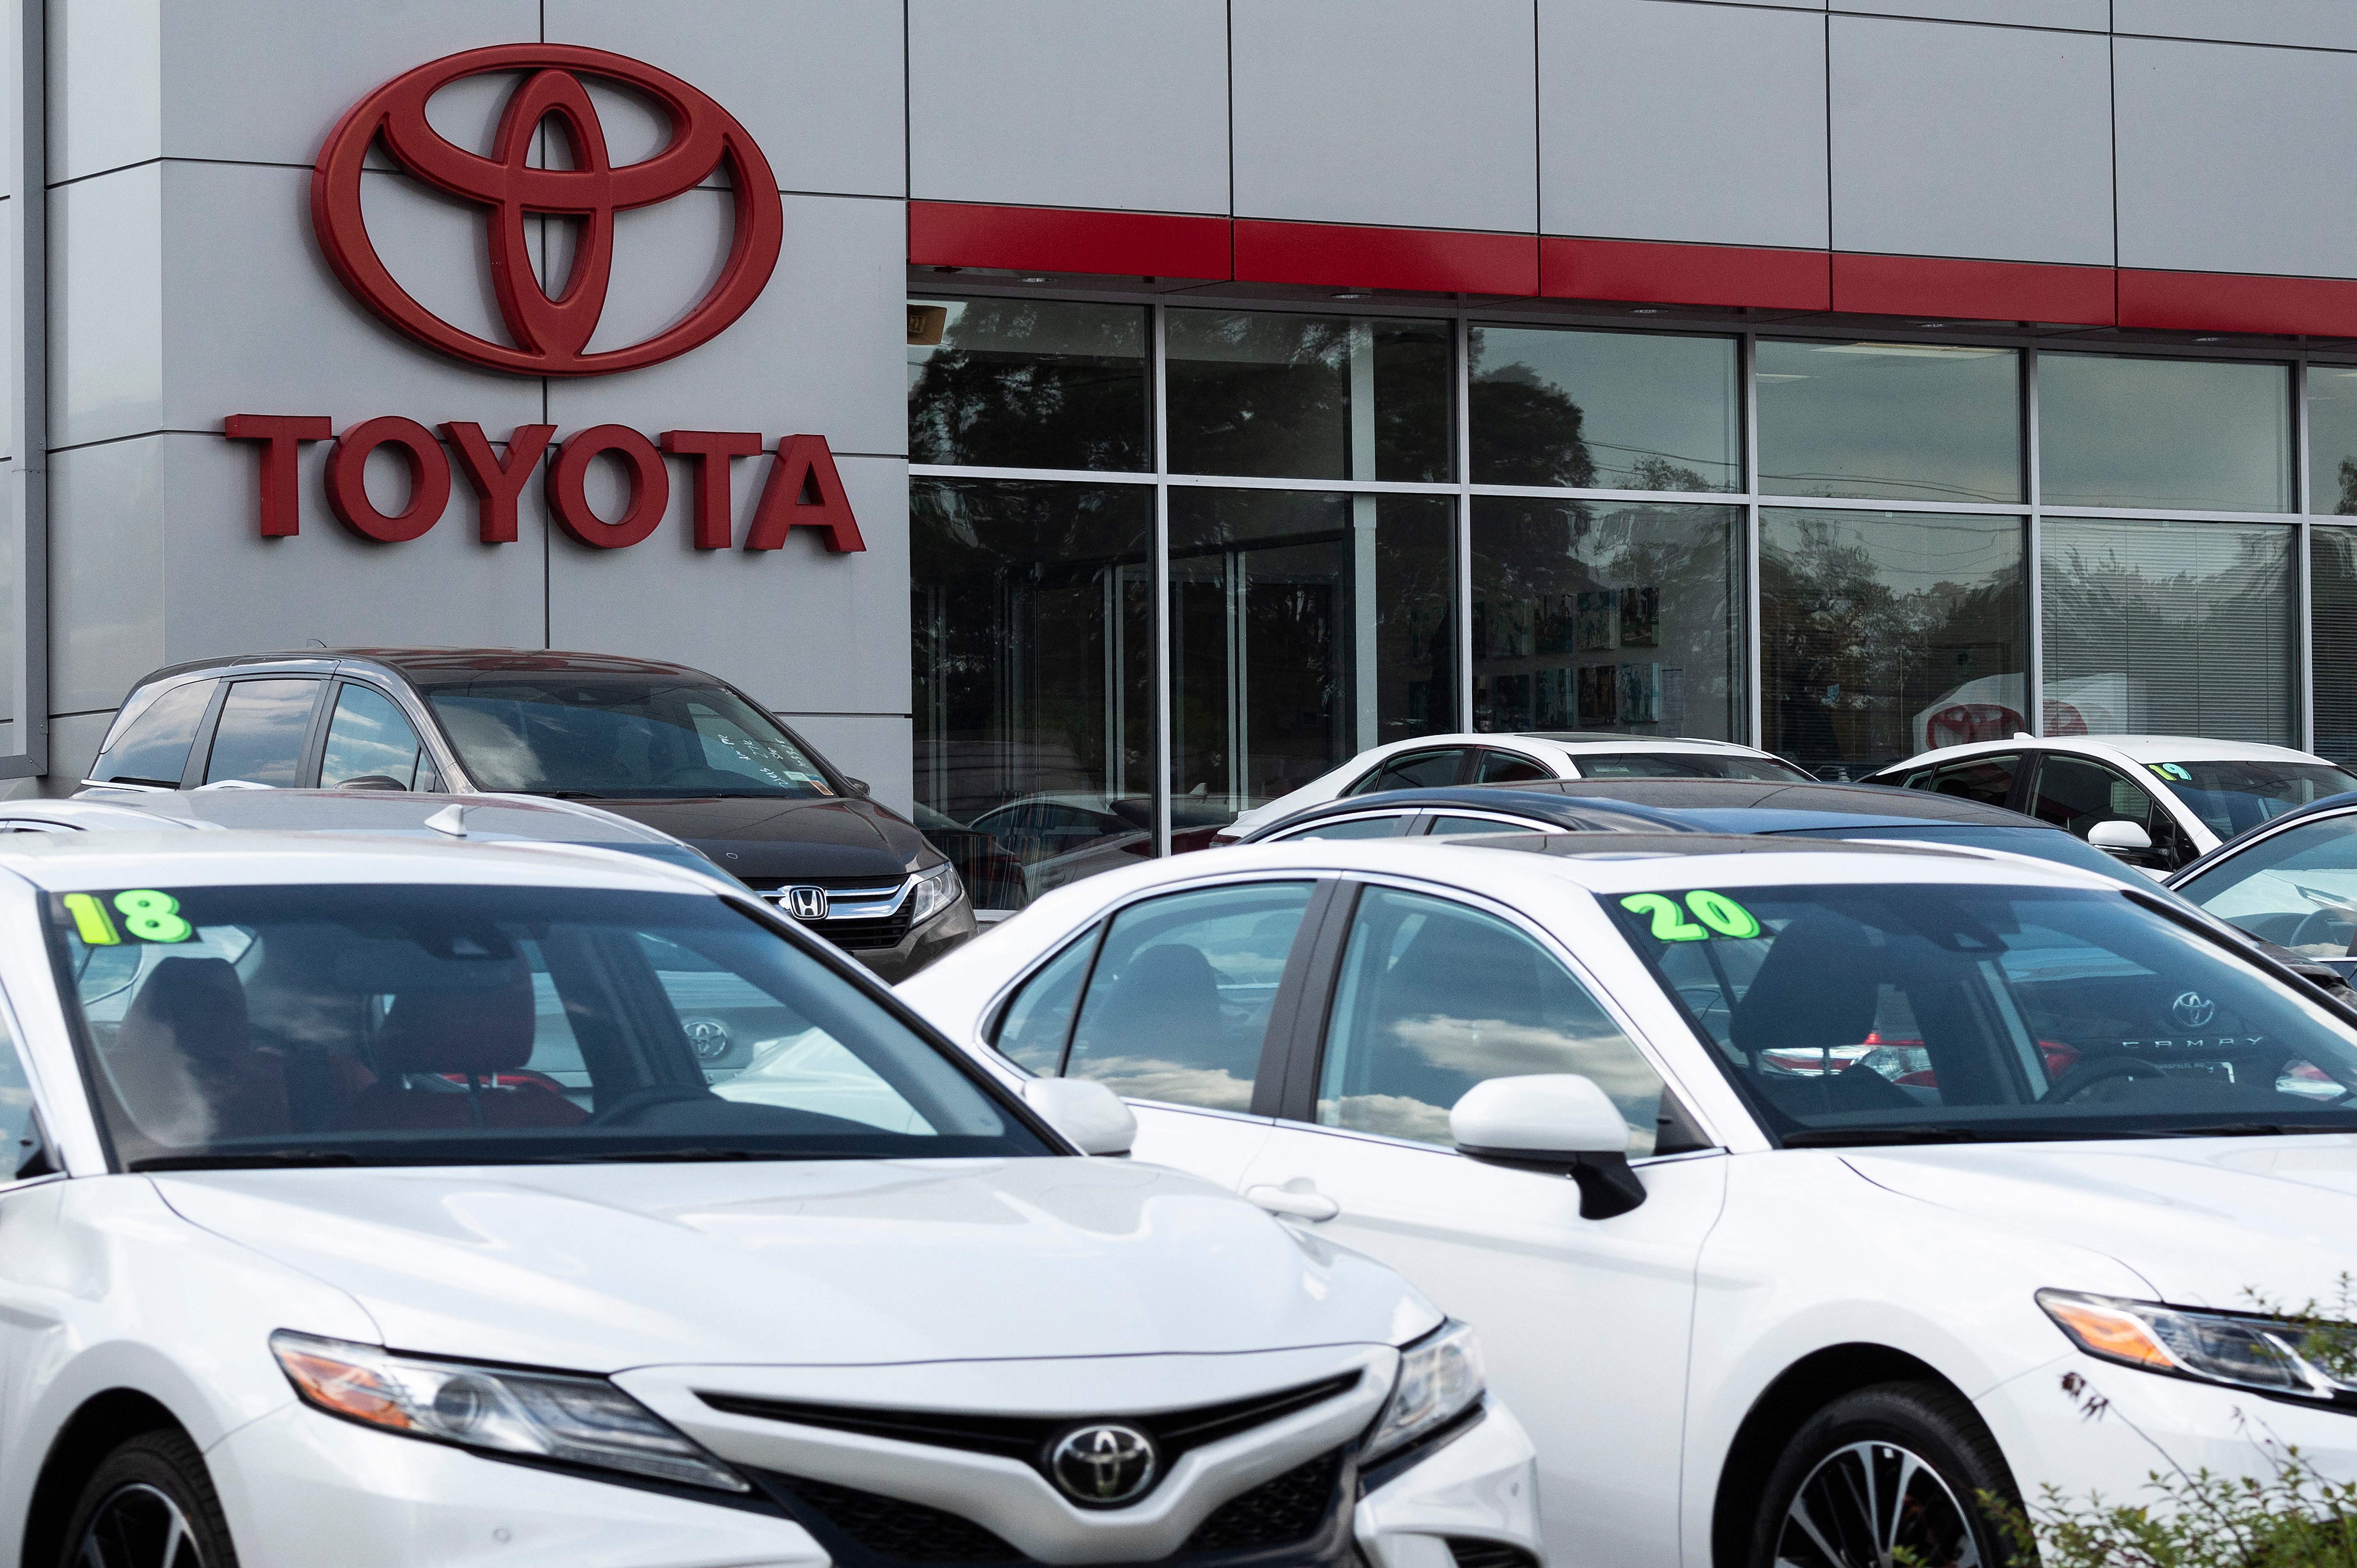 Toyota tops GM sales in the U.S., expected to be America's best-selling automaker